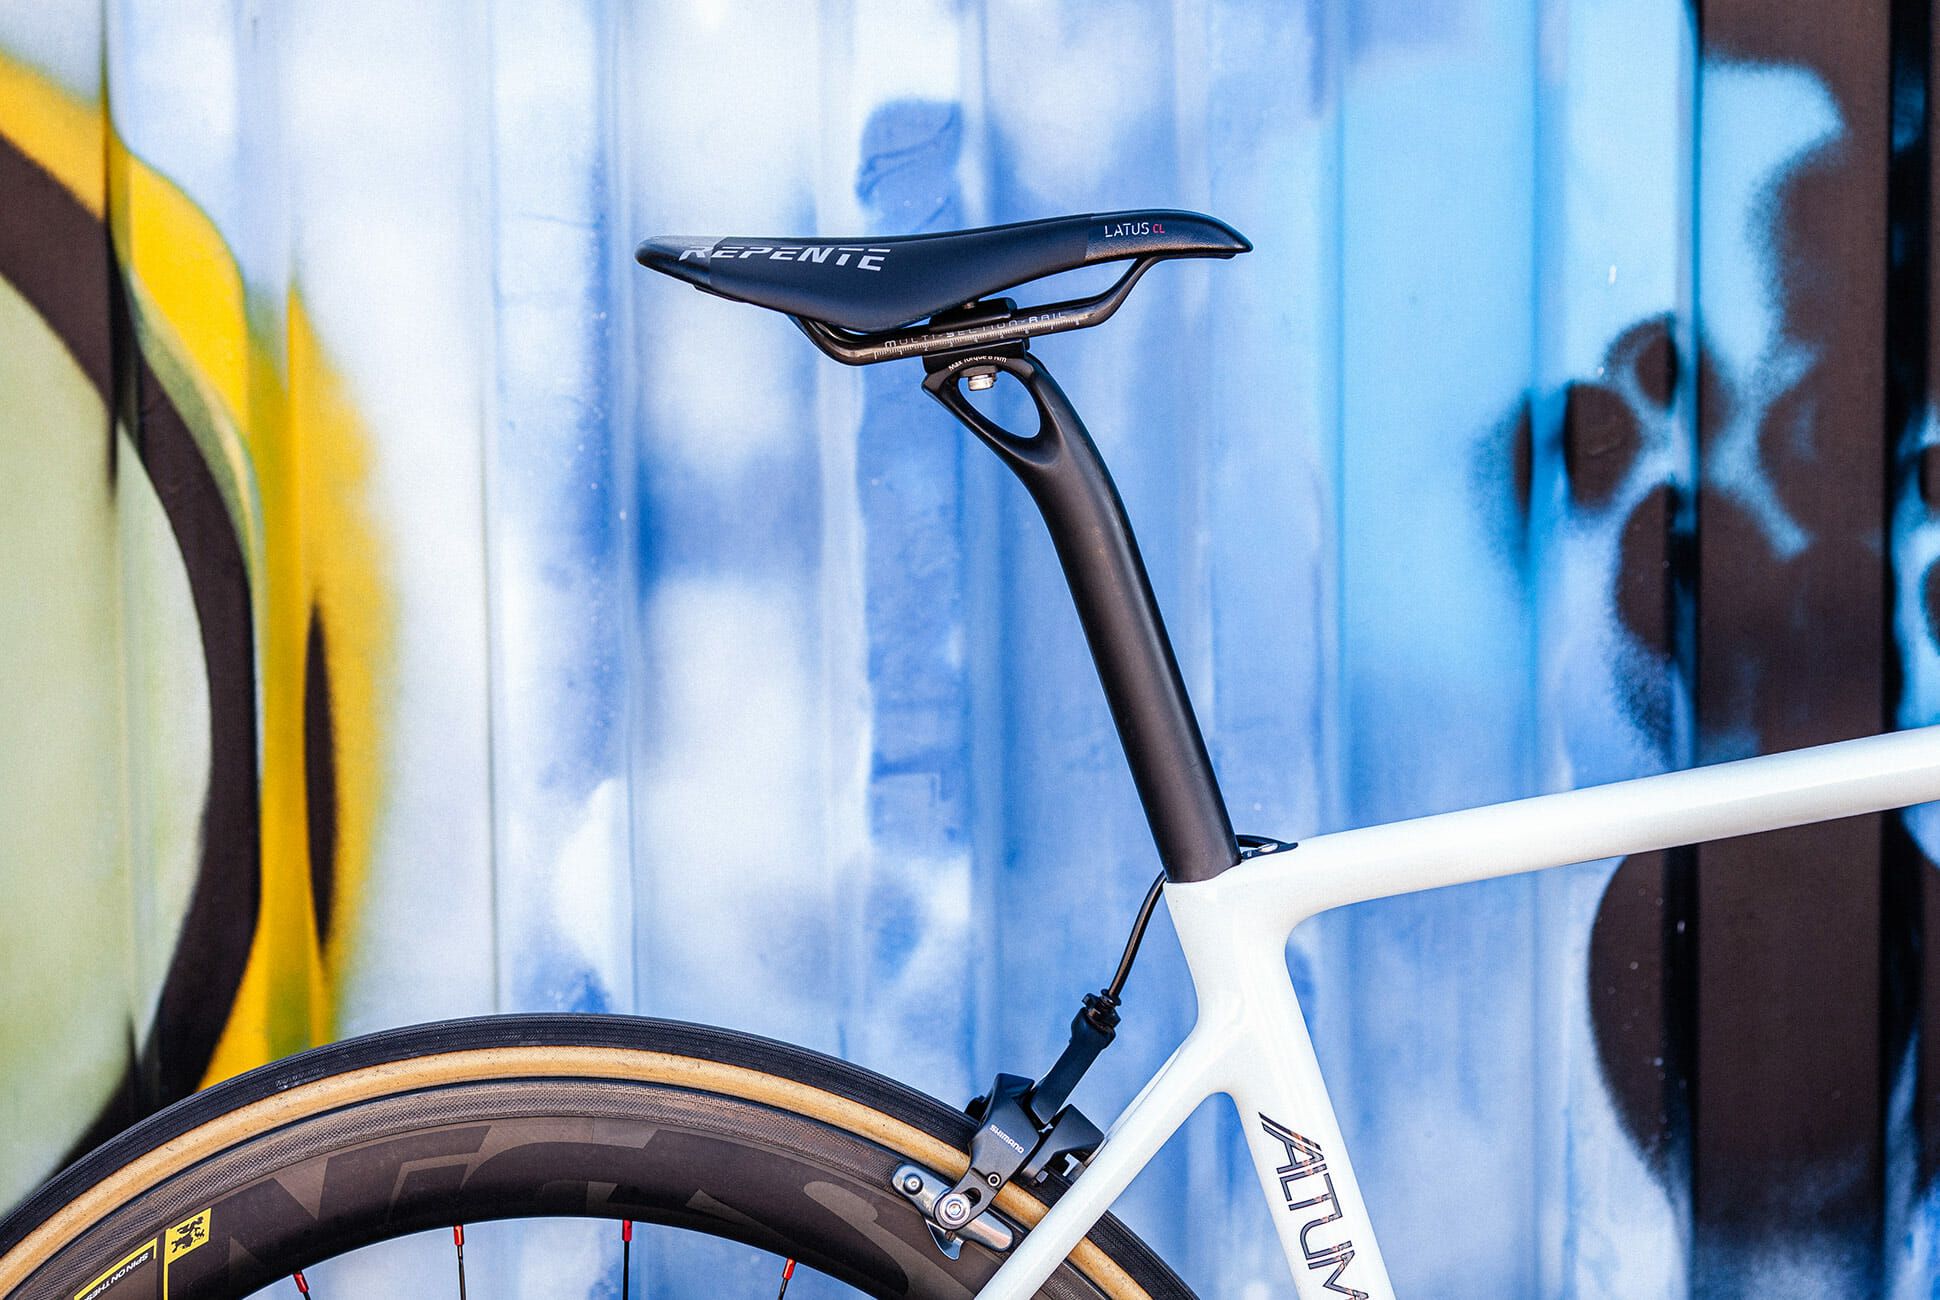 One of the Best Bike Saddles Is Made by a Company You've Never Heard Of